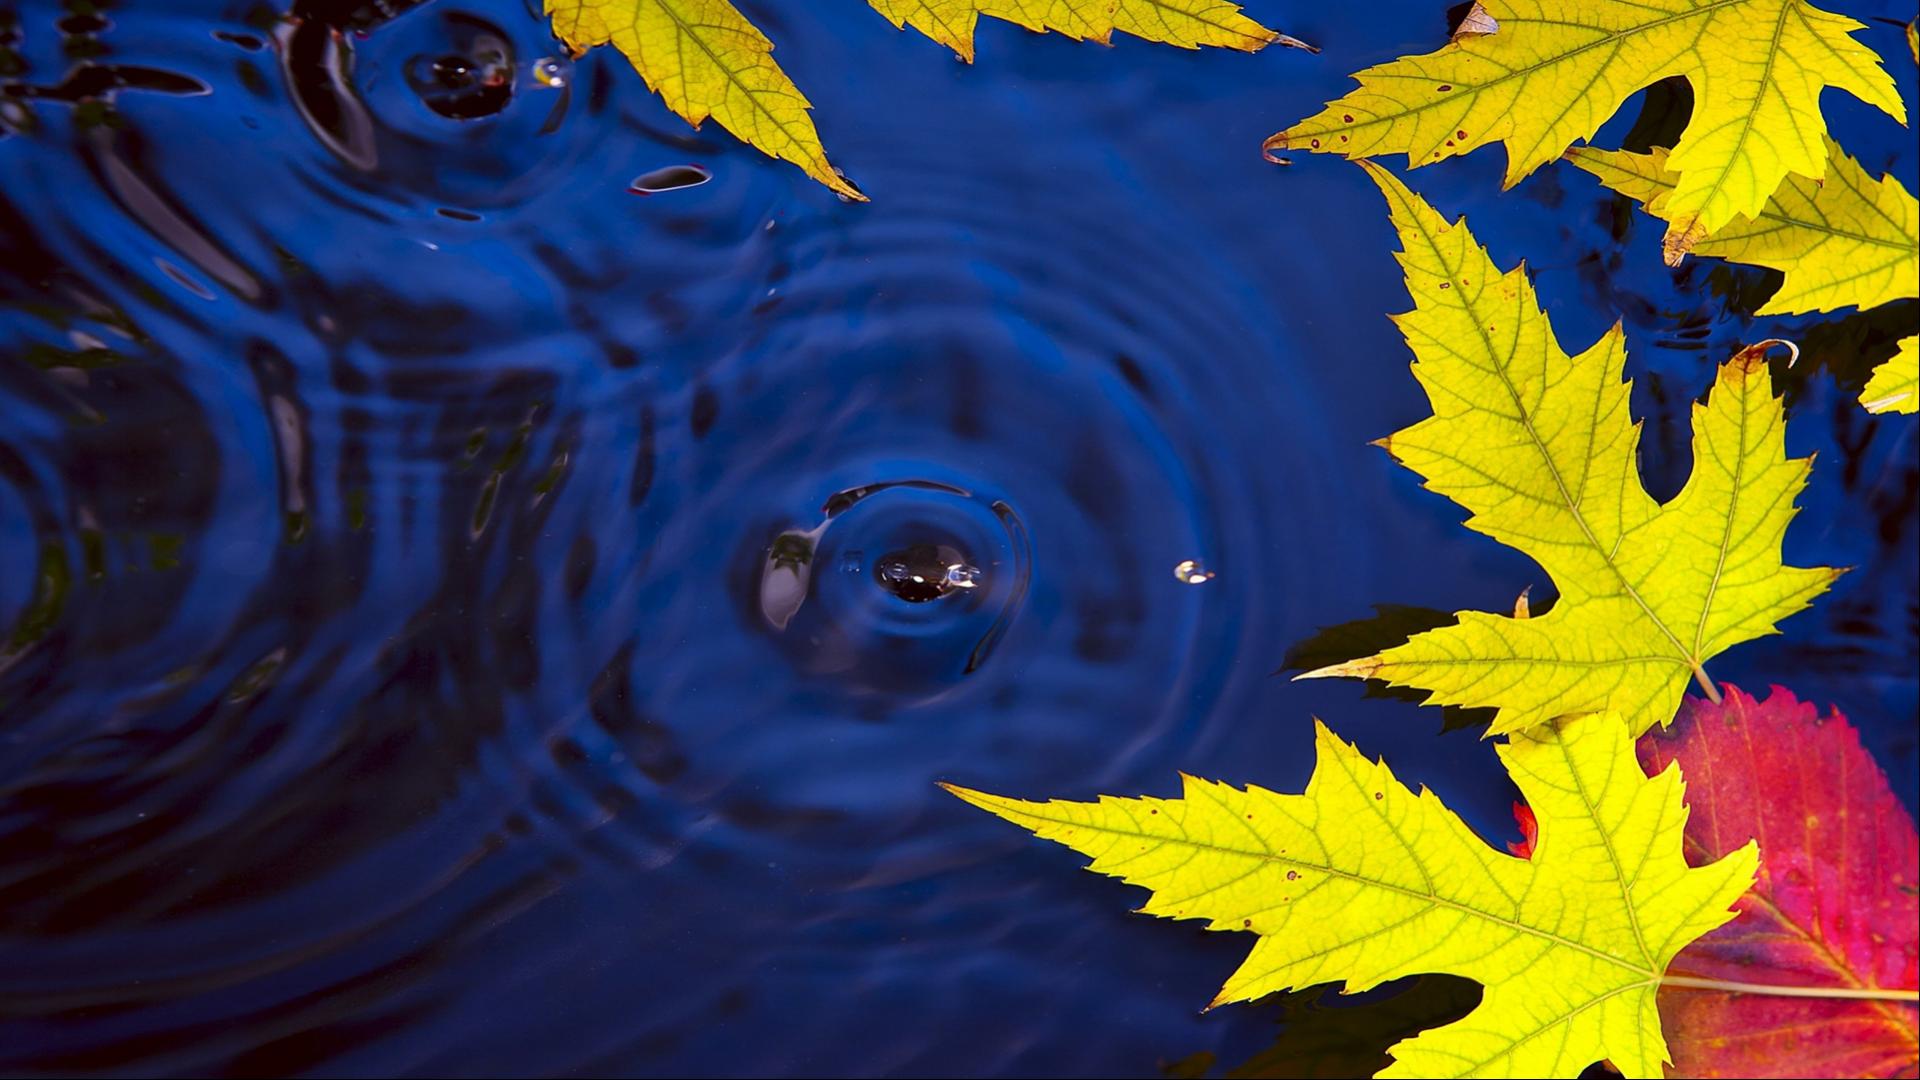 Autumn Leaves On Water Live Wallpaper in HD Wallpaper. Wallpaper Download. High Resolution Wallpaper